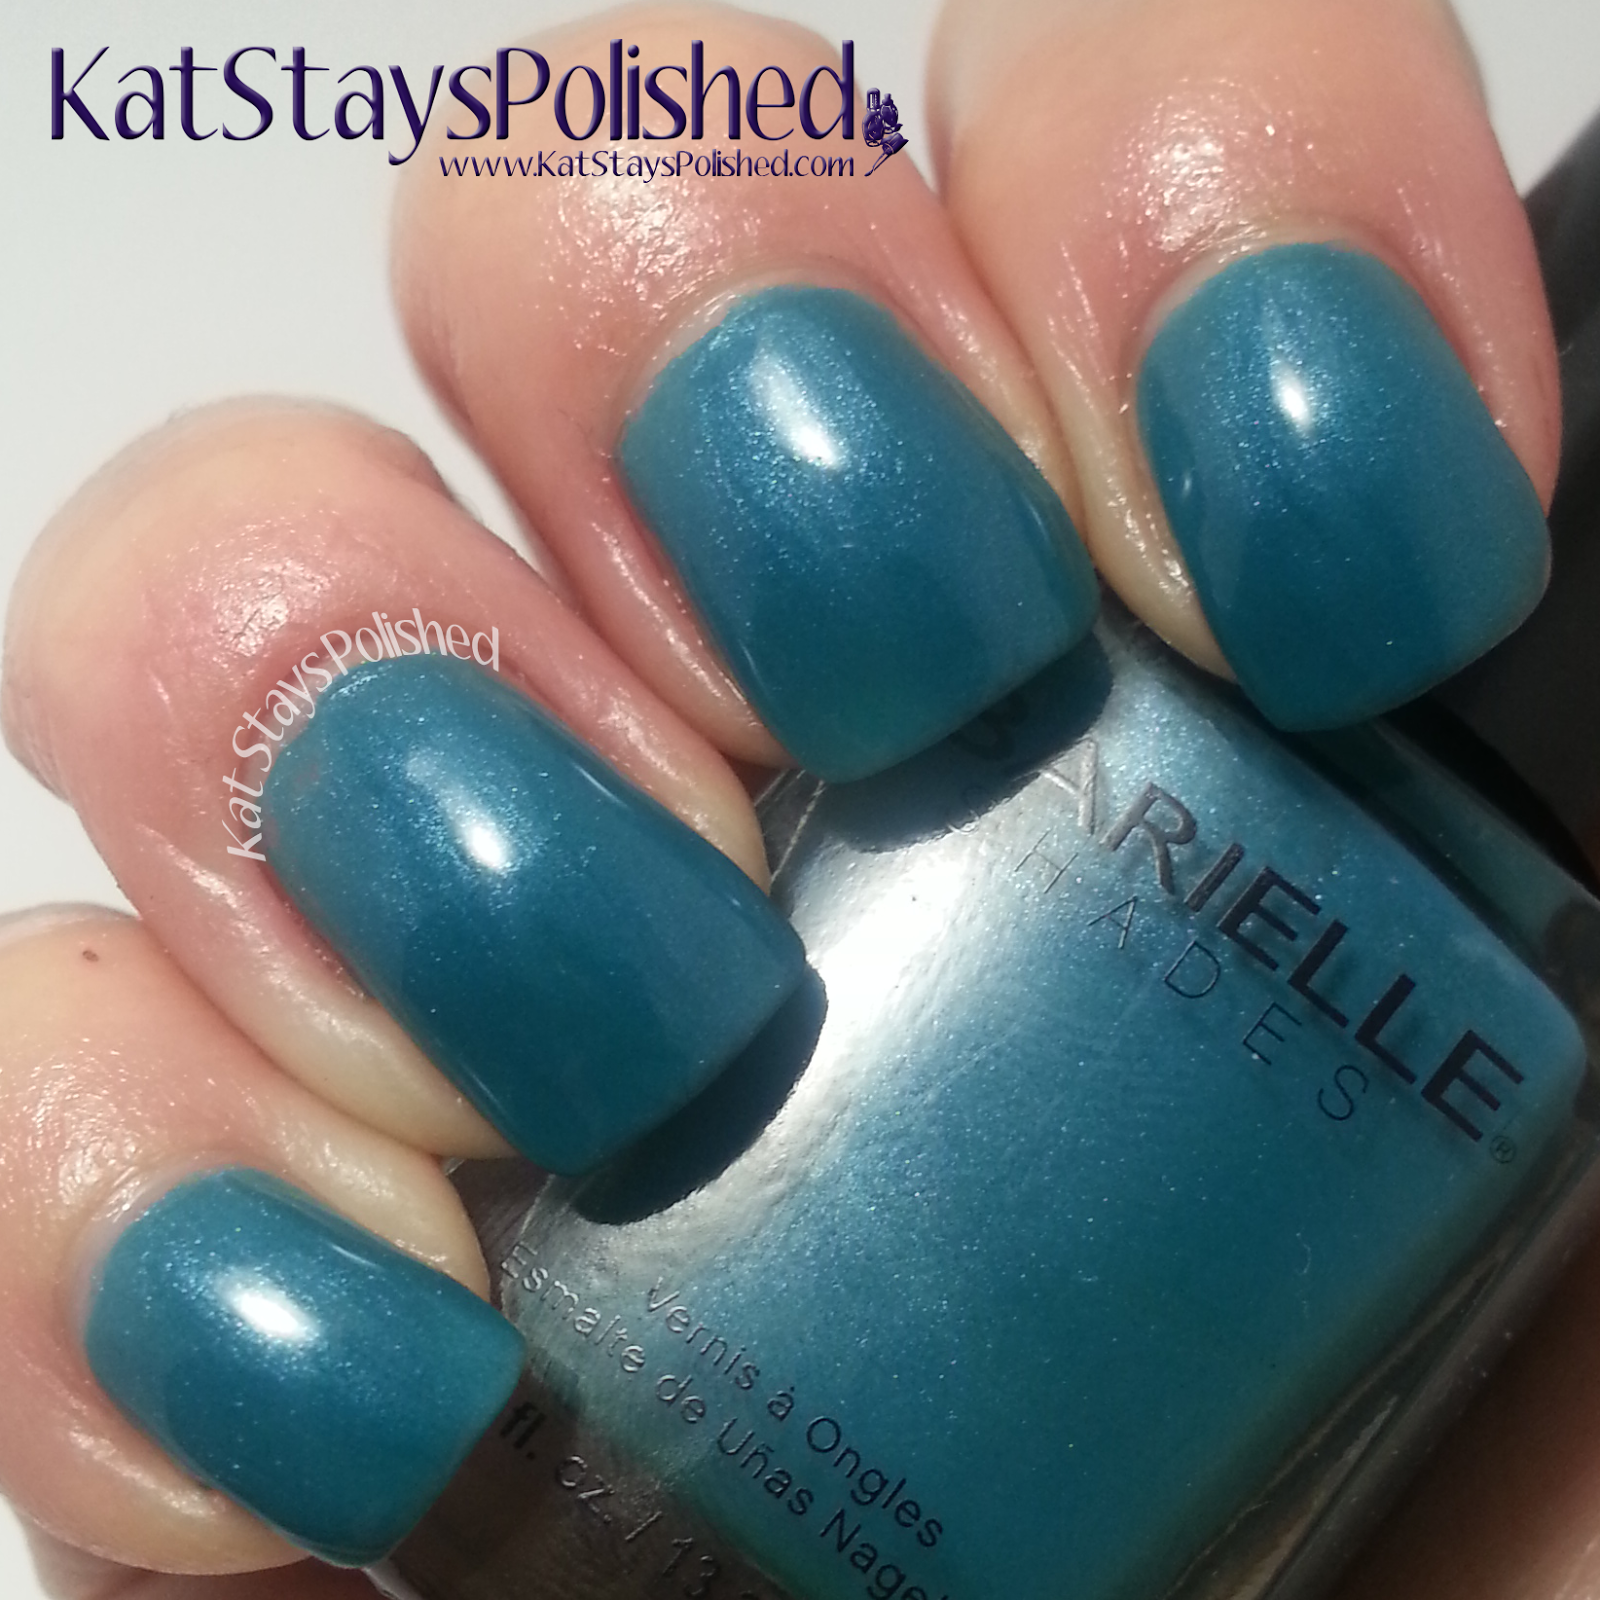 Barielle Gentle Breeze - Under the Sea | Kat Stays Polished